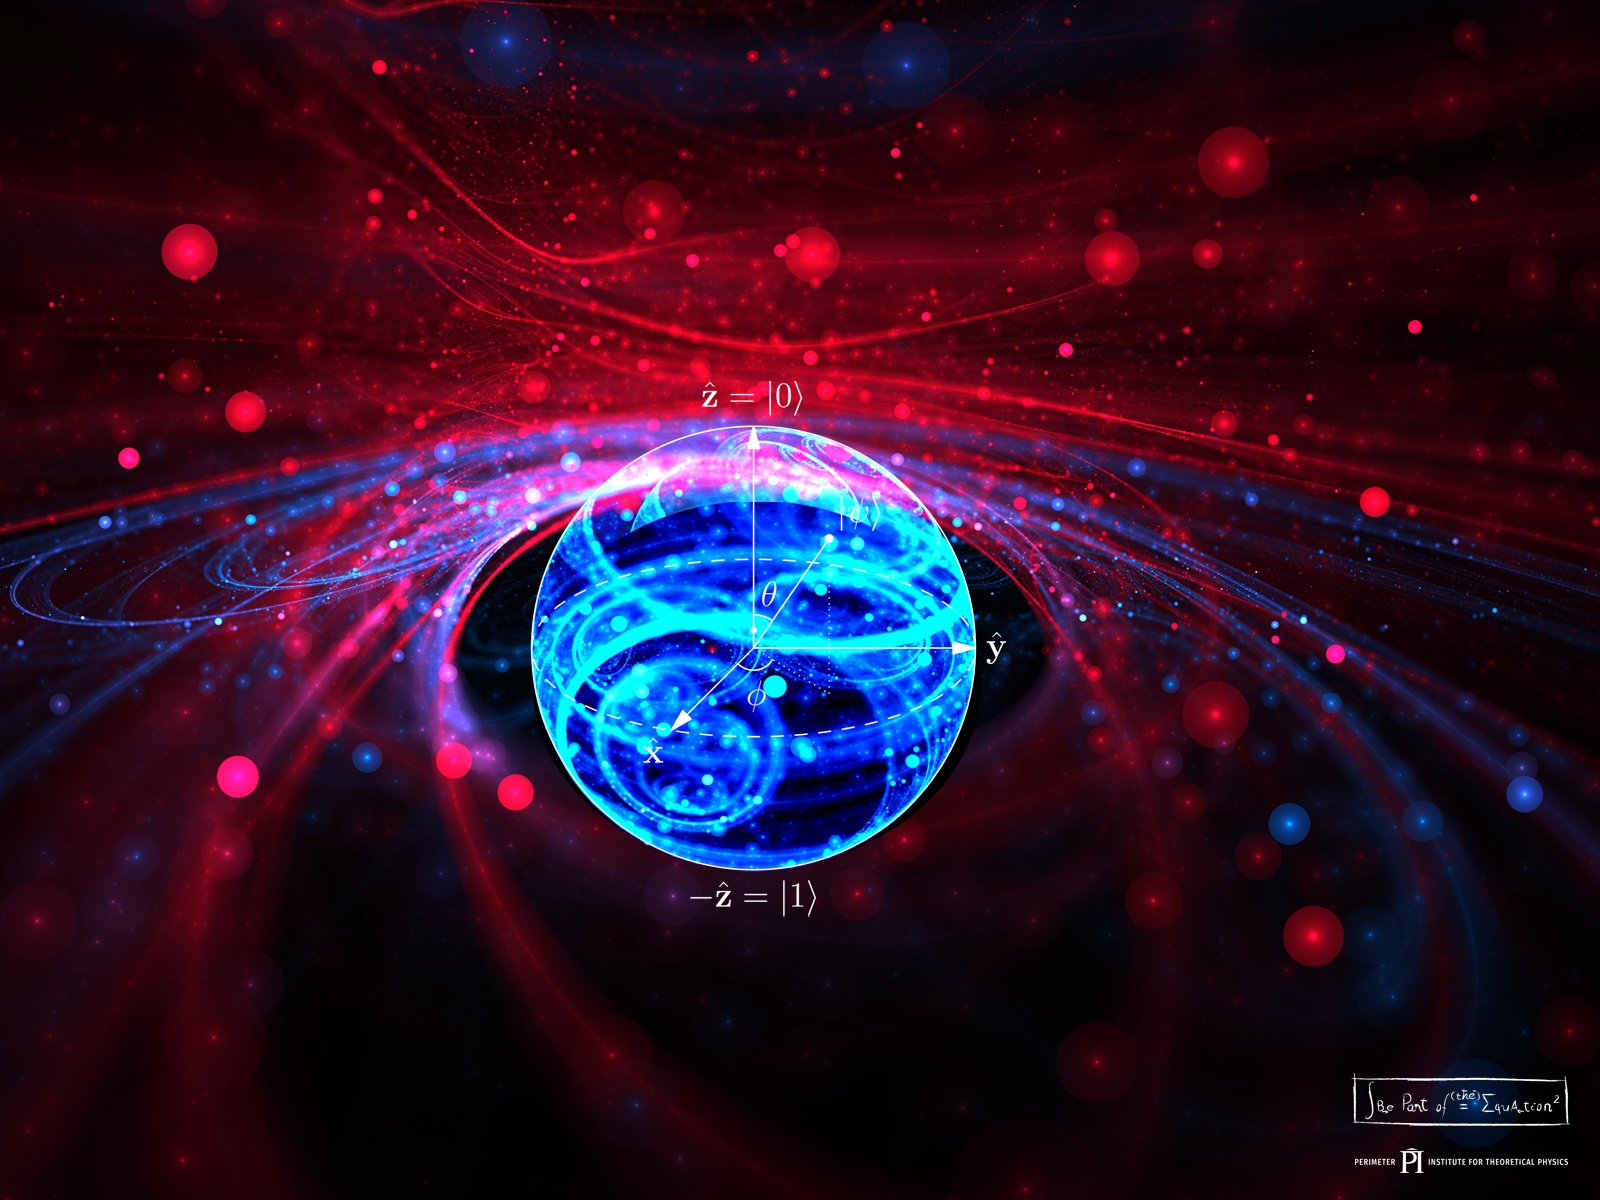 8 inspiring (and free!) scientific wallpapers to smarten up any device